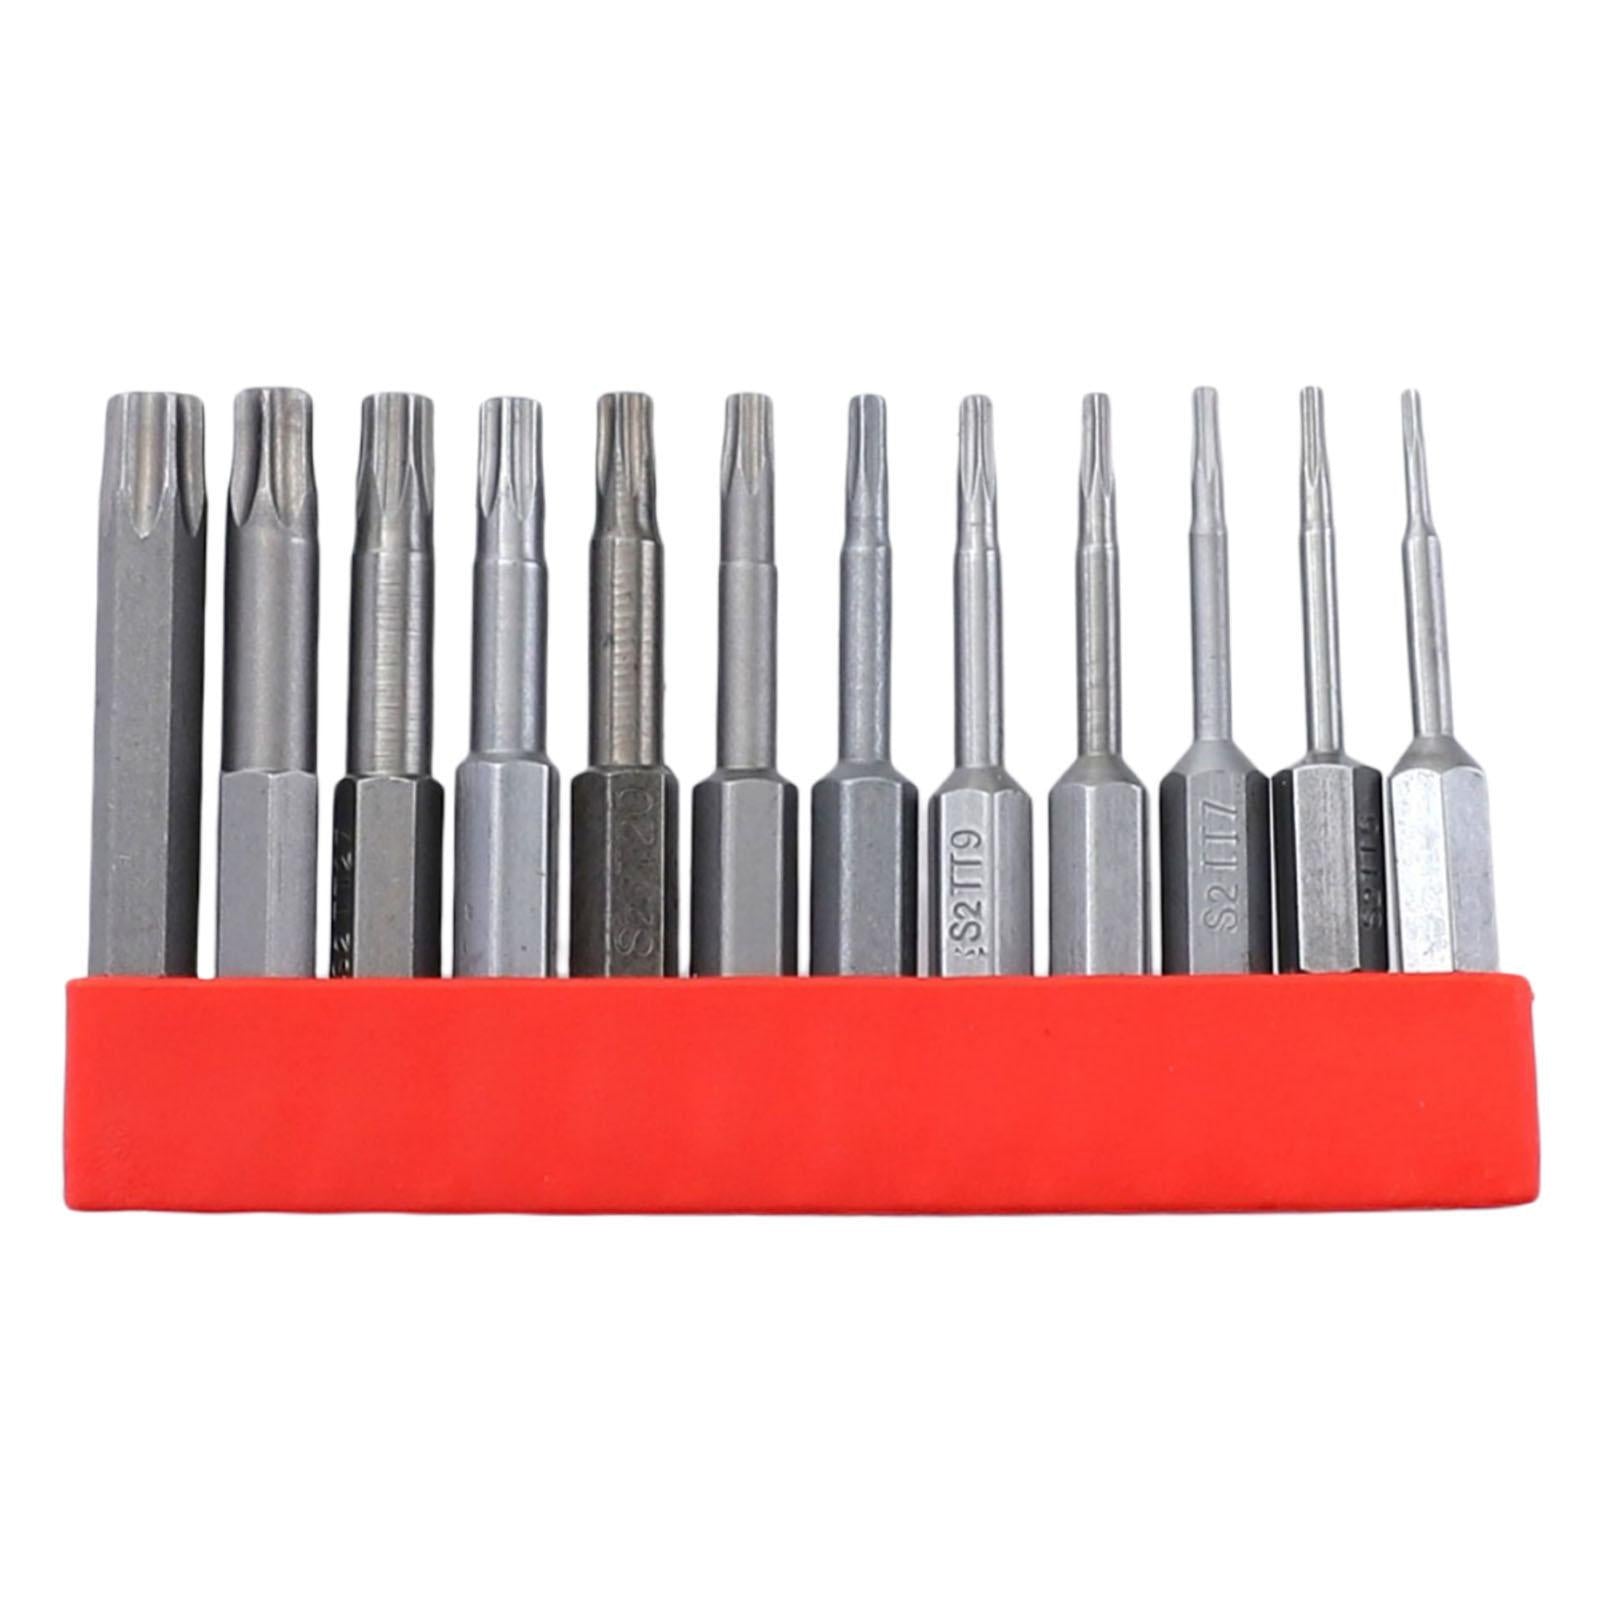 12 Pieces Hollow Rings Wrench Bit Set S2 Alloy Steel Metric for Metalworking 50mm